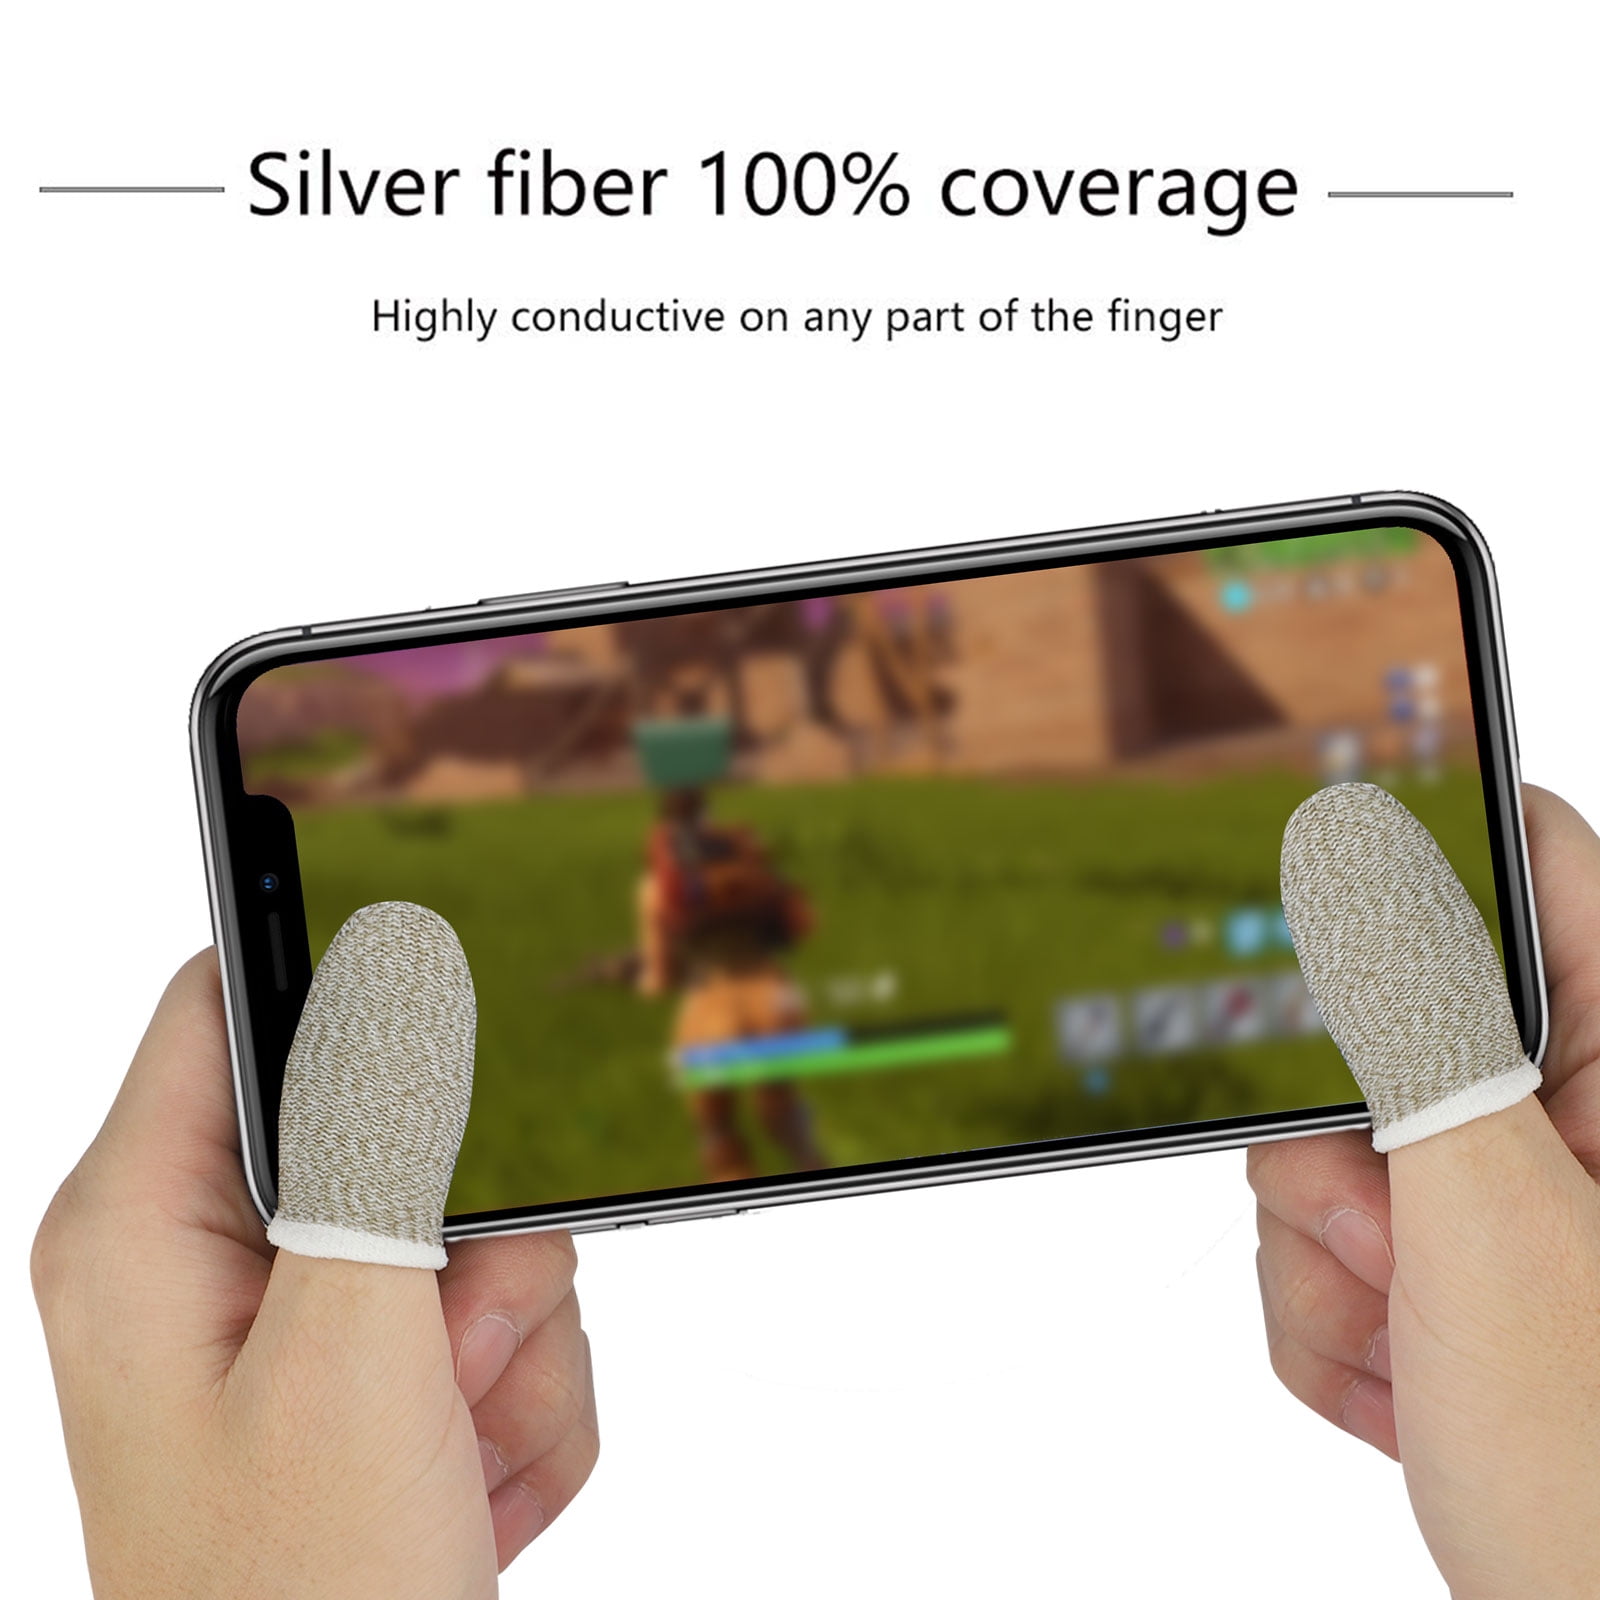 Qoosea Mobile Game Controller Finger Sleeve Sets Breathable Anti-Sweat Full Touch Screen Sensitive Shoot Aim Joysticks Finger Set for PUBG/Knives Out/Rules of Survival for Android iOS 6 Pack 